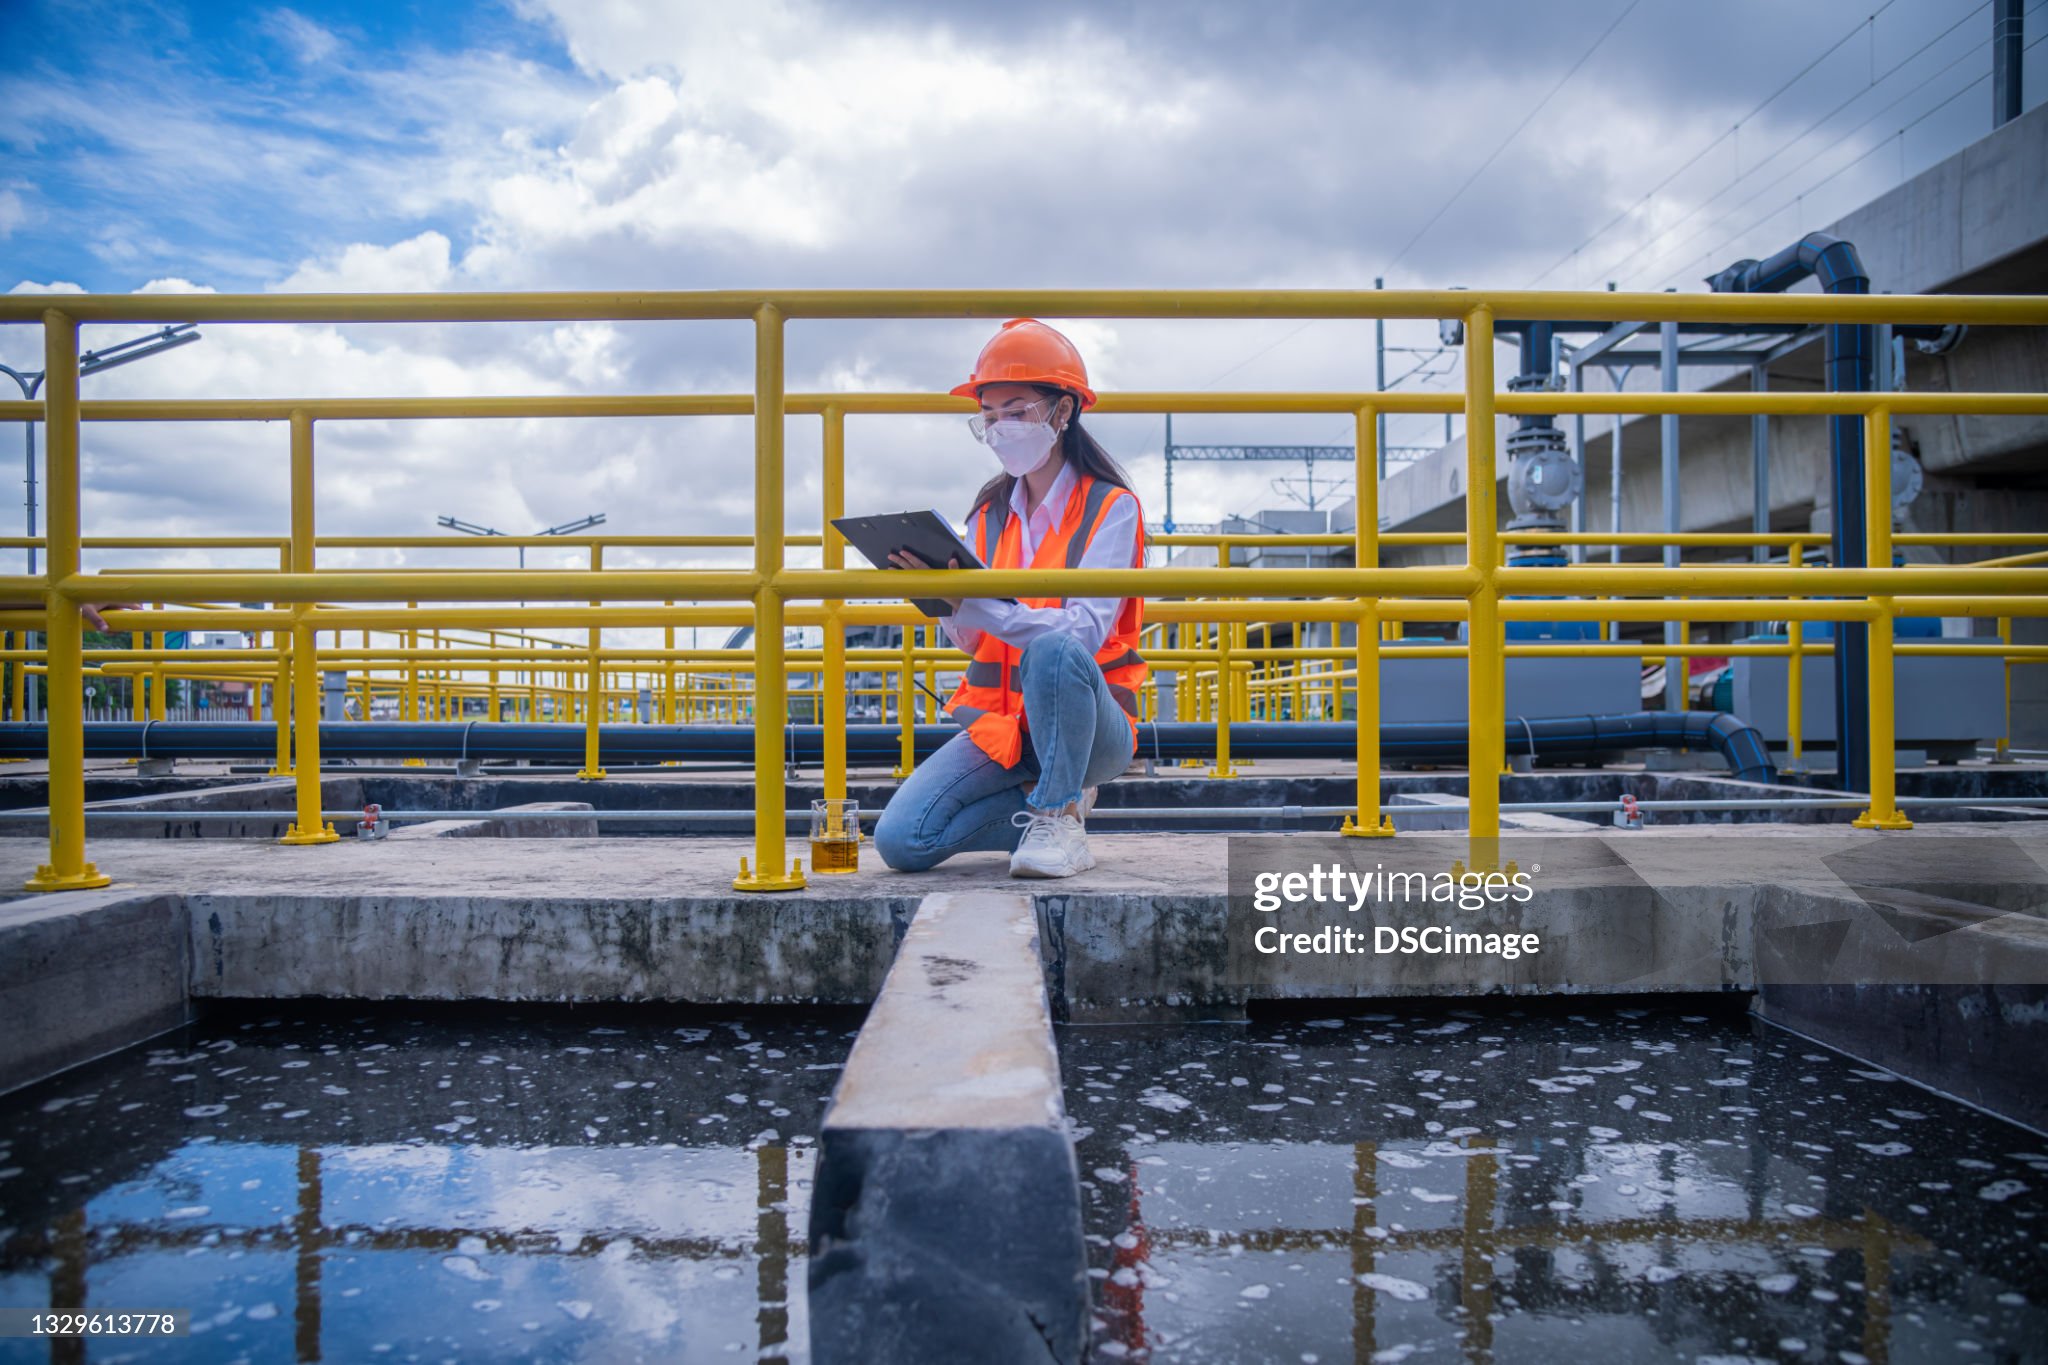 gettyimages 1329613778 2048x2048 1 Contaminated Land Services 15